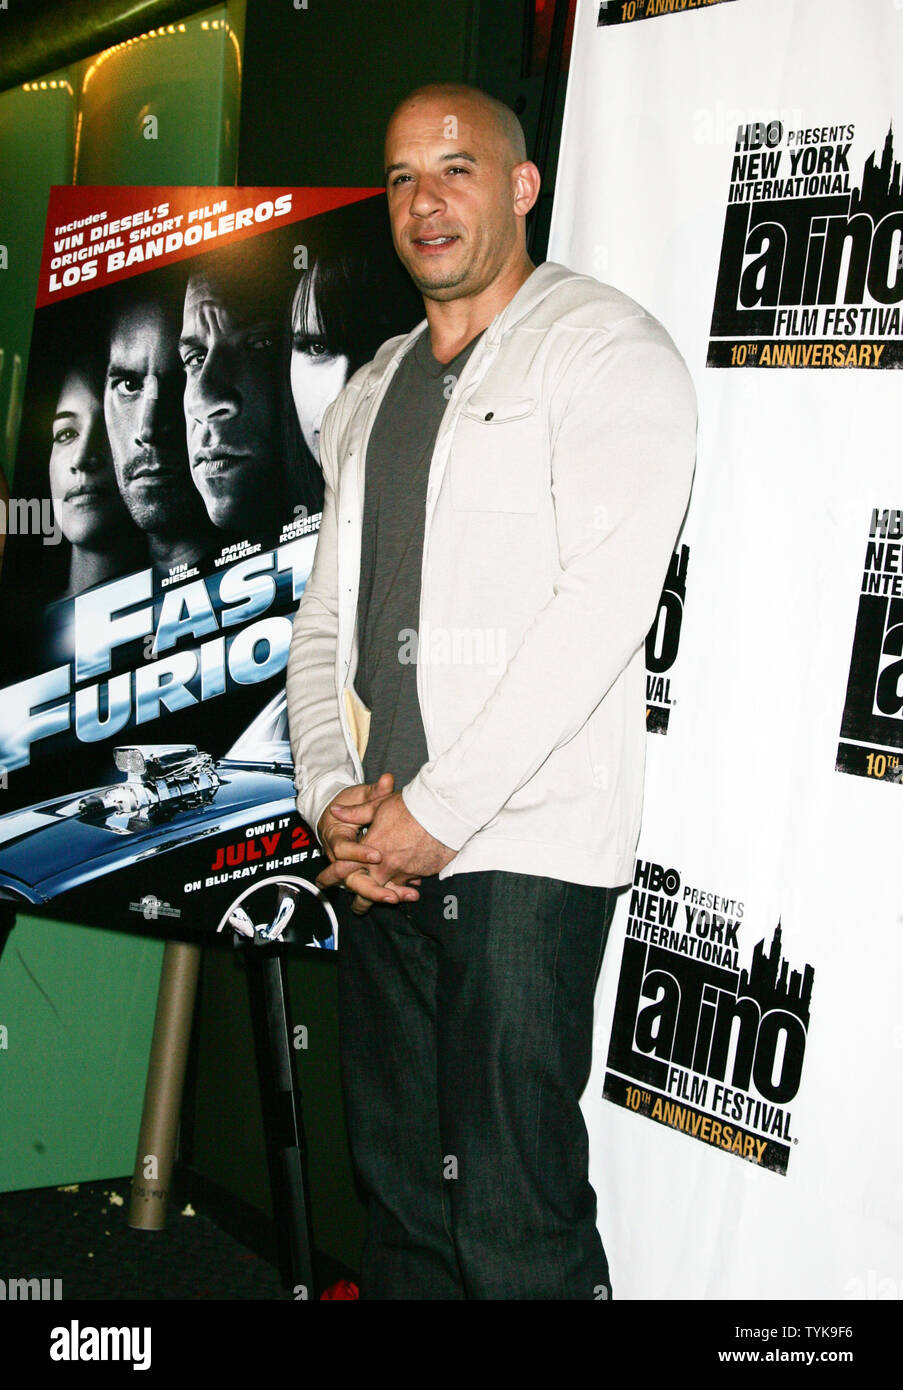 Vin Diesel arrives for the 10th Anniversary of the New York International Latino Film Festival  premiere of "Fast & The Furious"/"Los Bandoleros" at the School of Visual Arts Theater in New York on July 29, 2009.   (UPI Photo/Laura Cavanaugh) Stock Photo